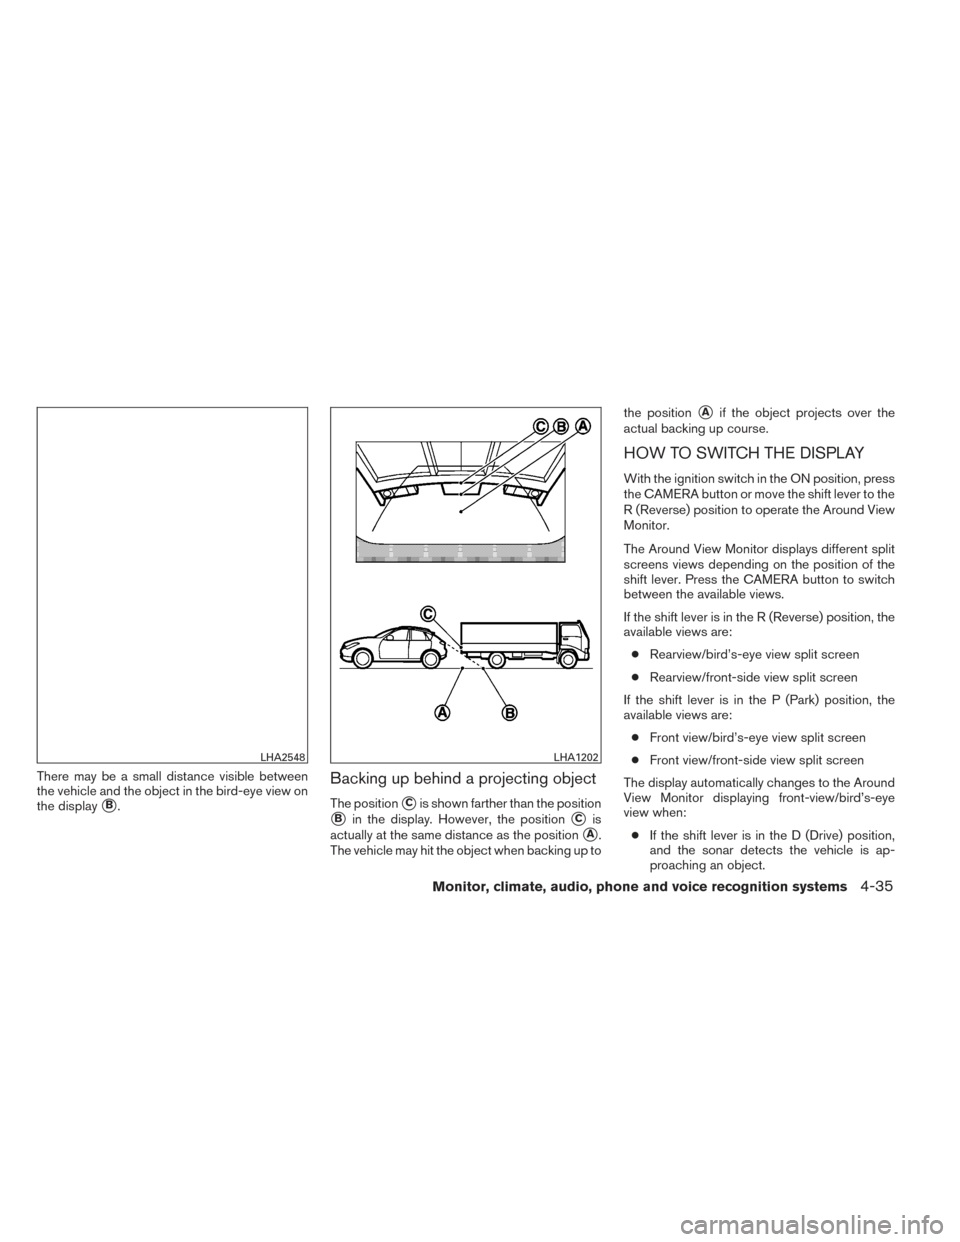 NISSAN PATHFINDER 2014 R52 / 4.G Owners Manual There may be a small distance visible between
the vehicle and the object in the bird-eye view on
the display
B.
Backing up behind a projecting object
The positionCis shown farther than the position
